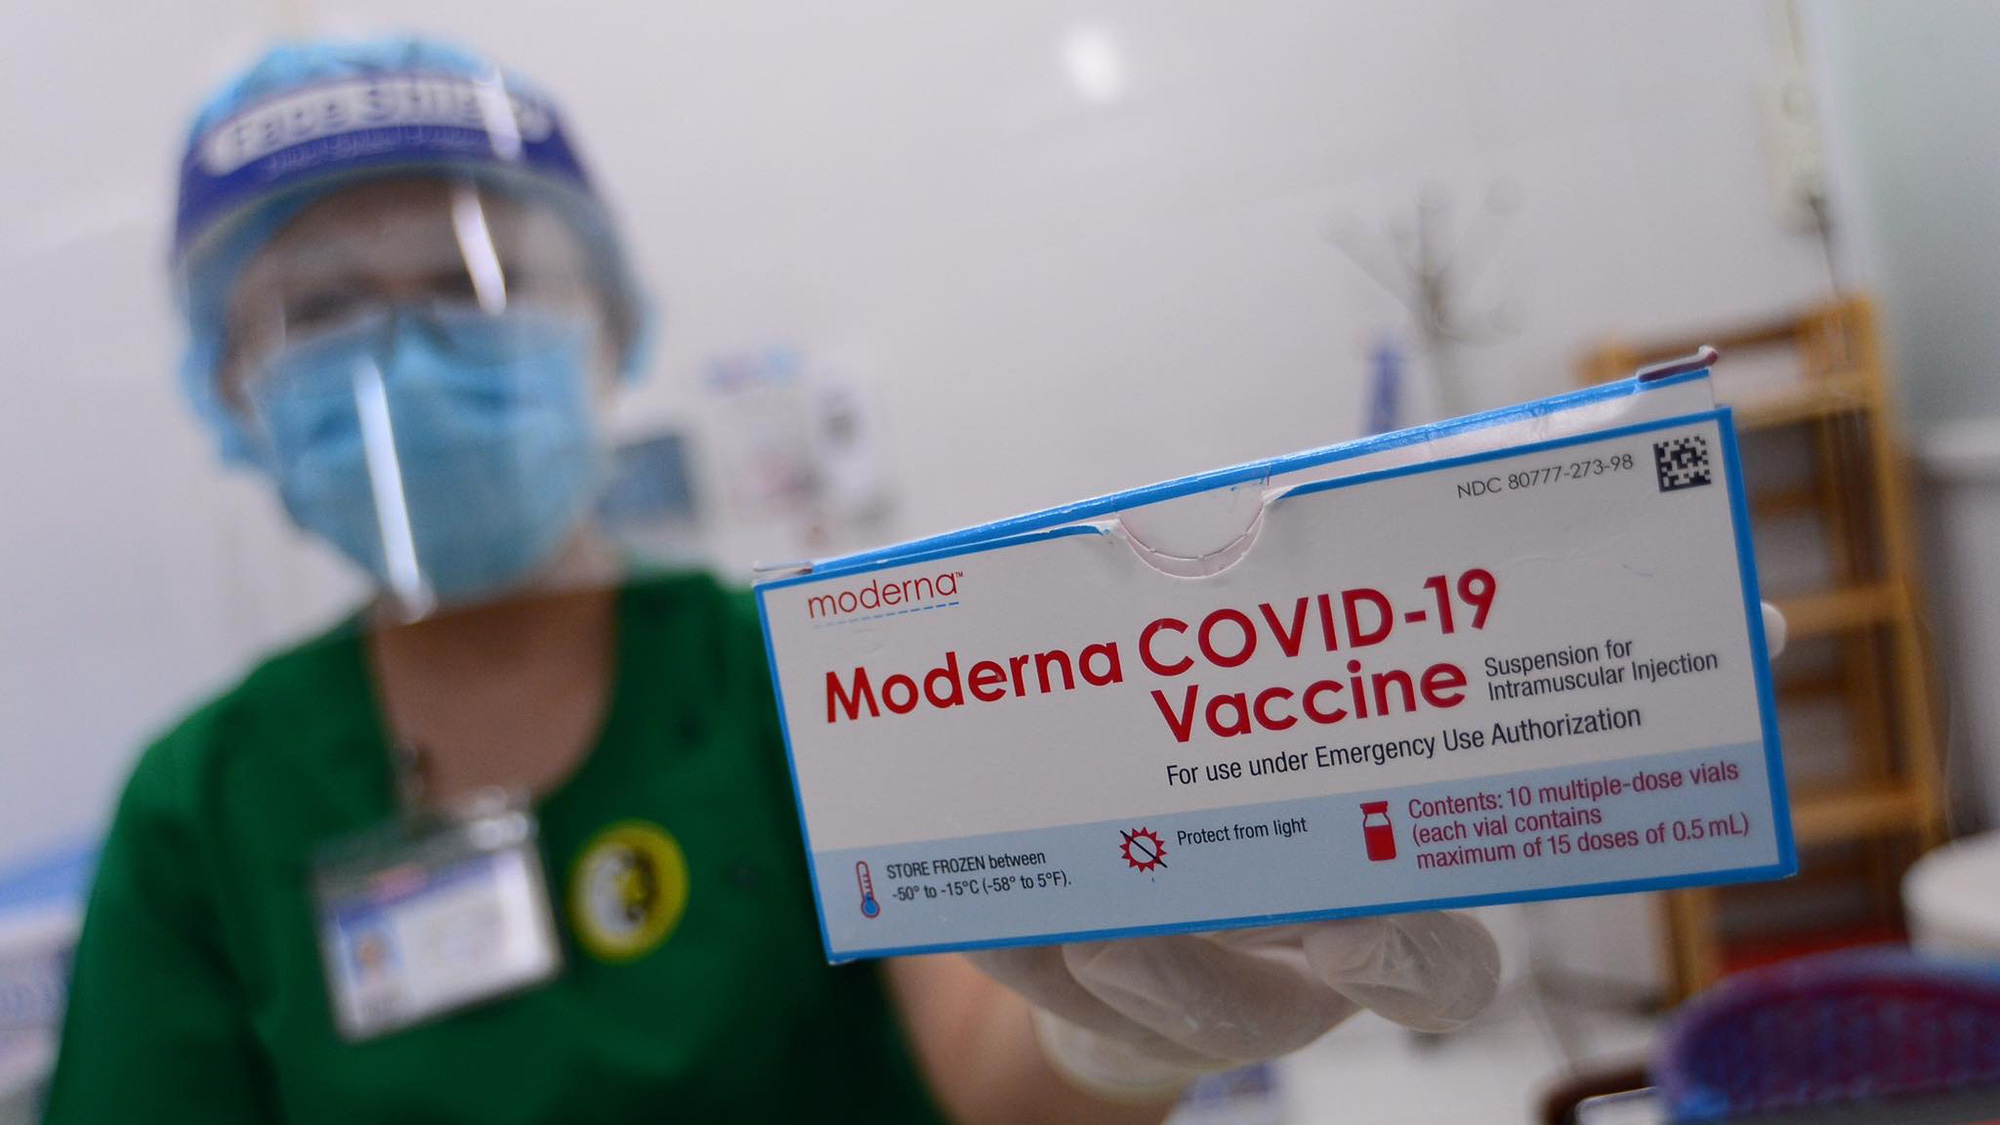 Moderna COVID-19 vaccine dearth worries first dose recipients in Ho Chi Minh City